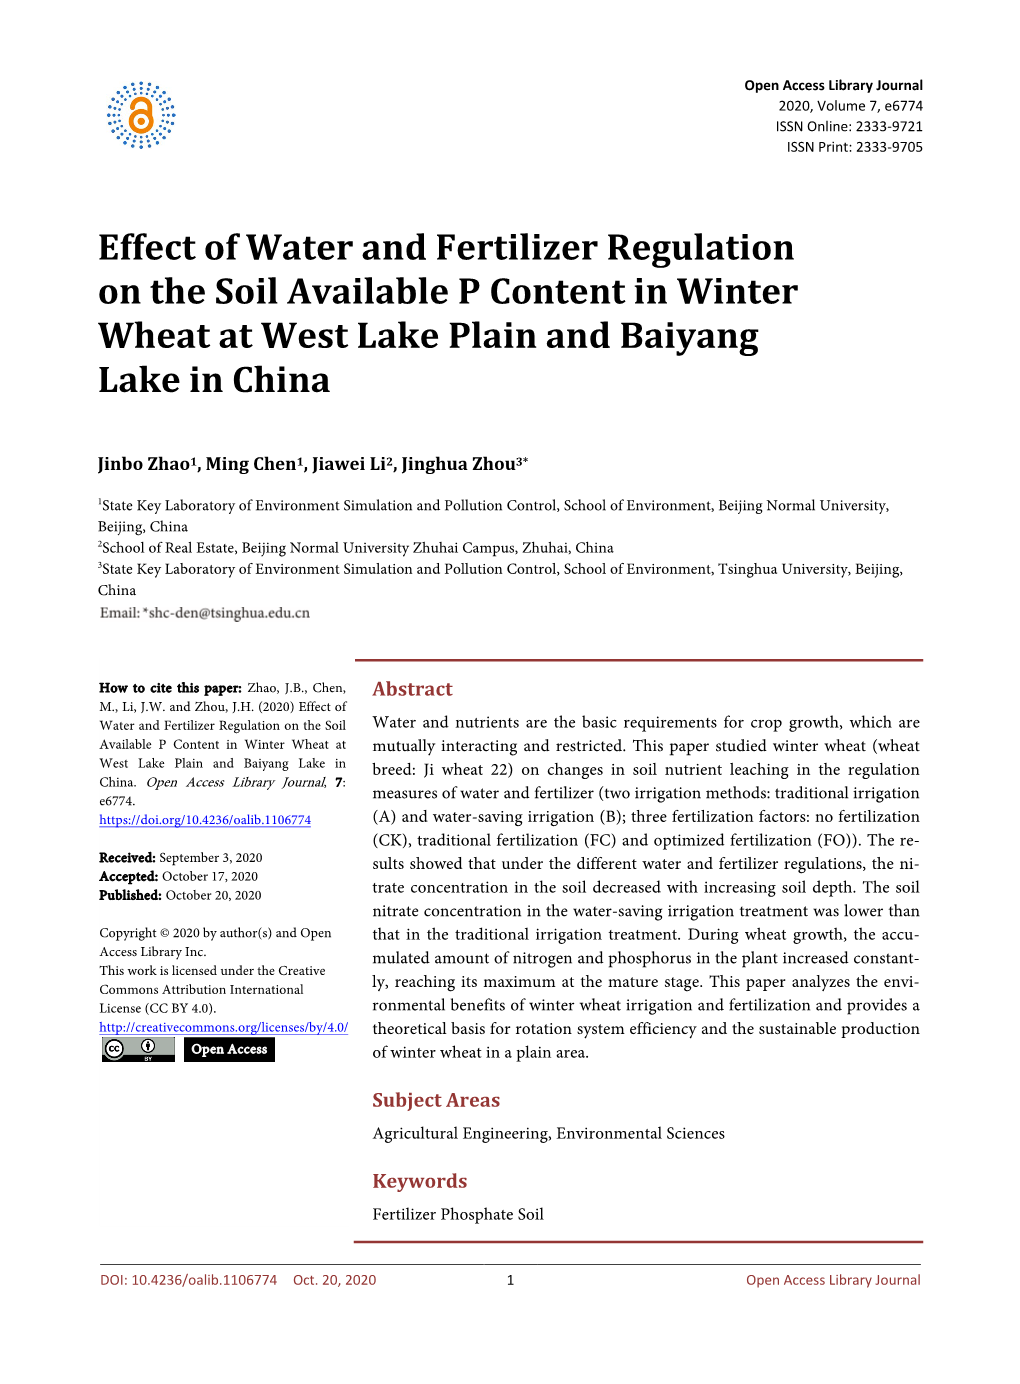 Effect of Water and Fertilizer Regulation on the Soil Available P Content in Winter Wheat at West Lake Plain and Baiyang Lake in China